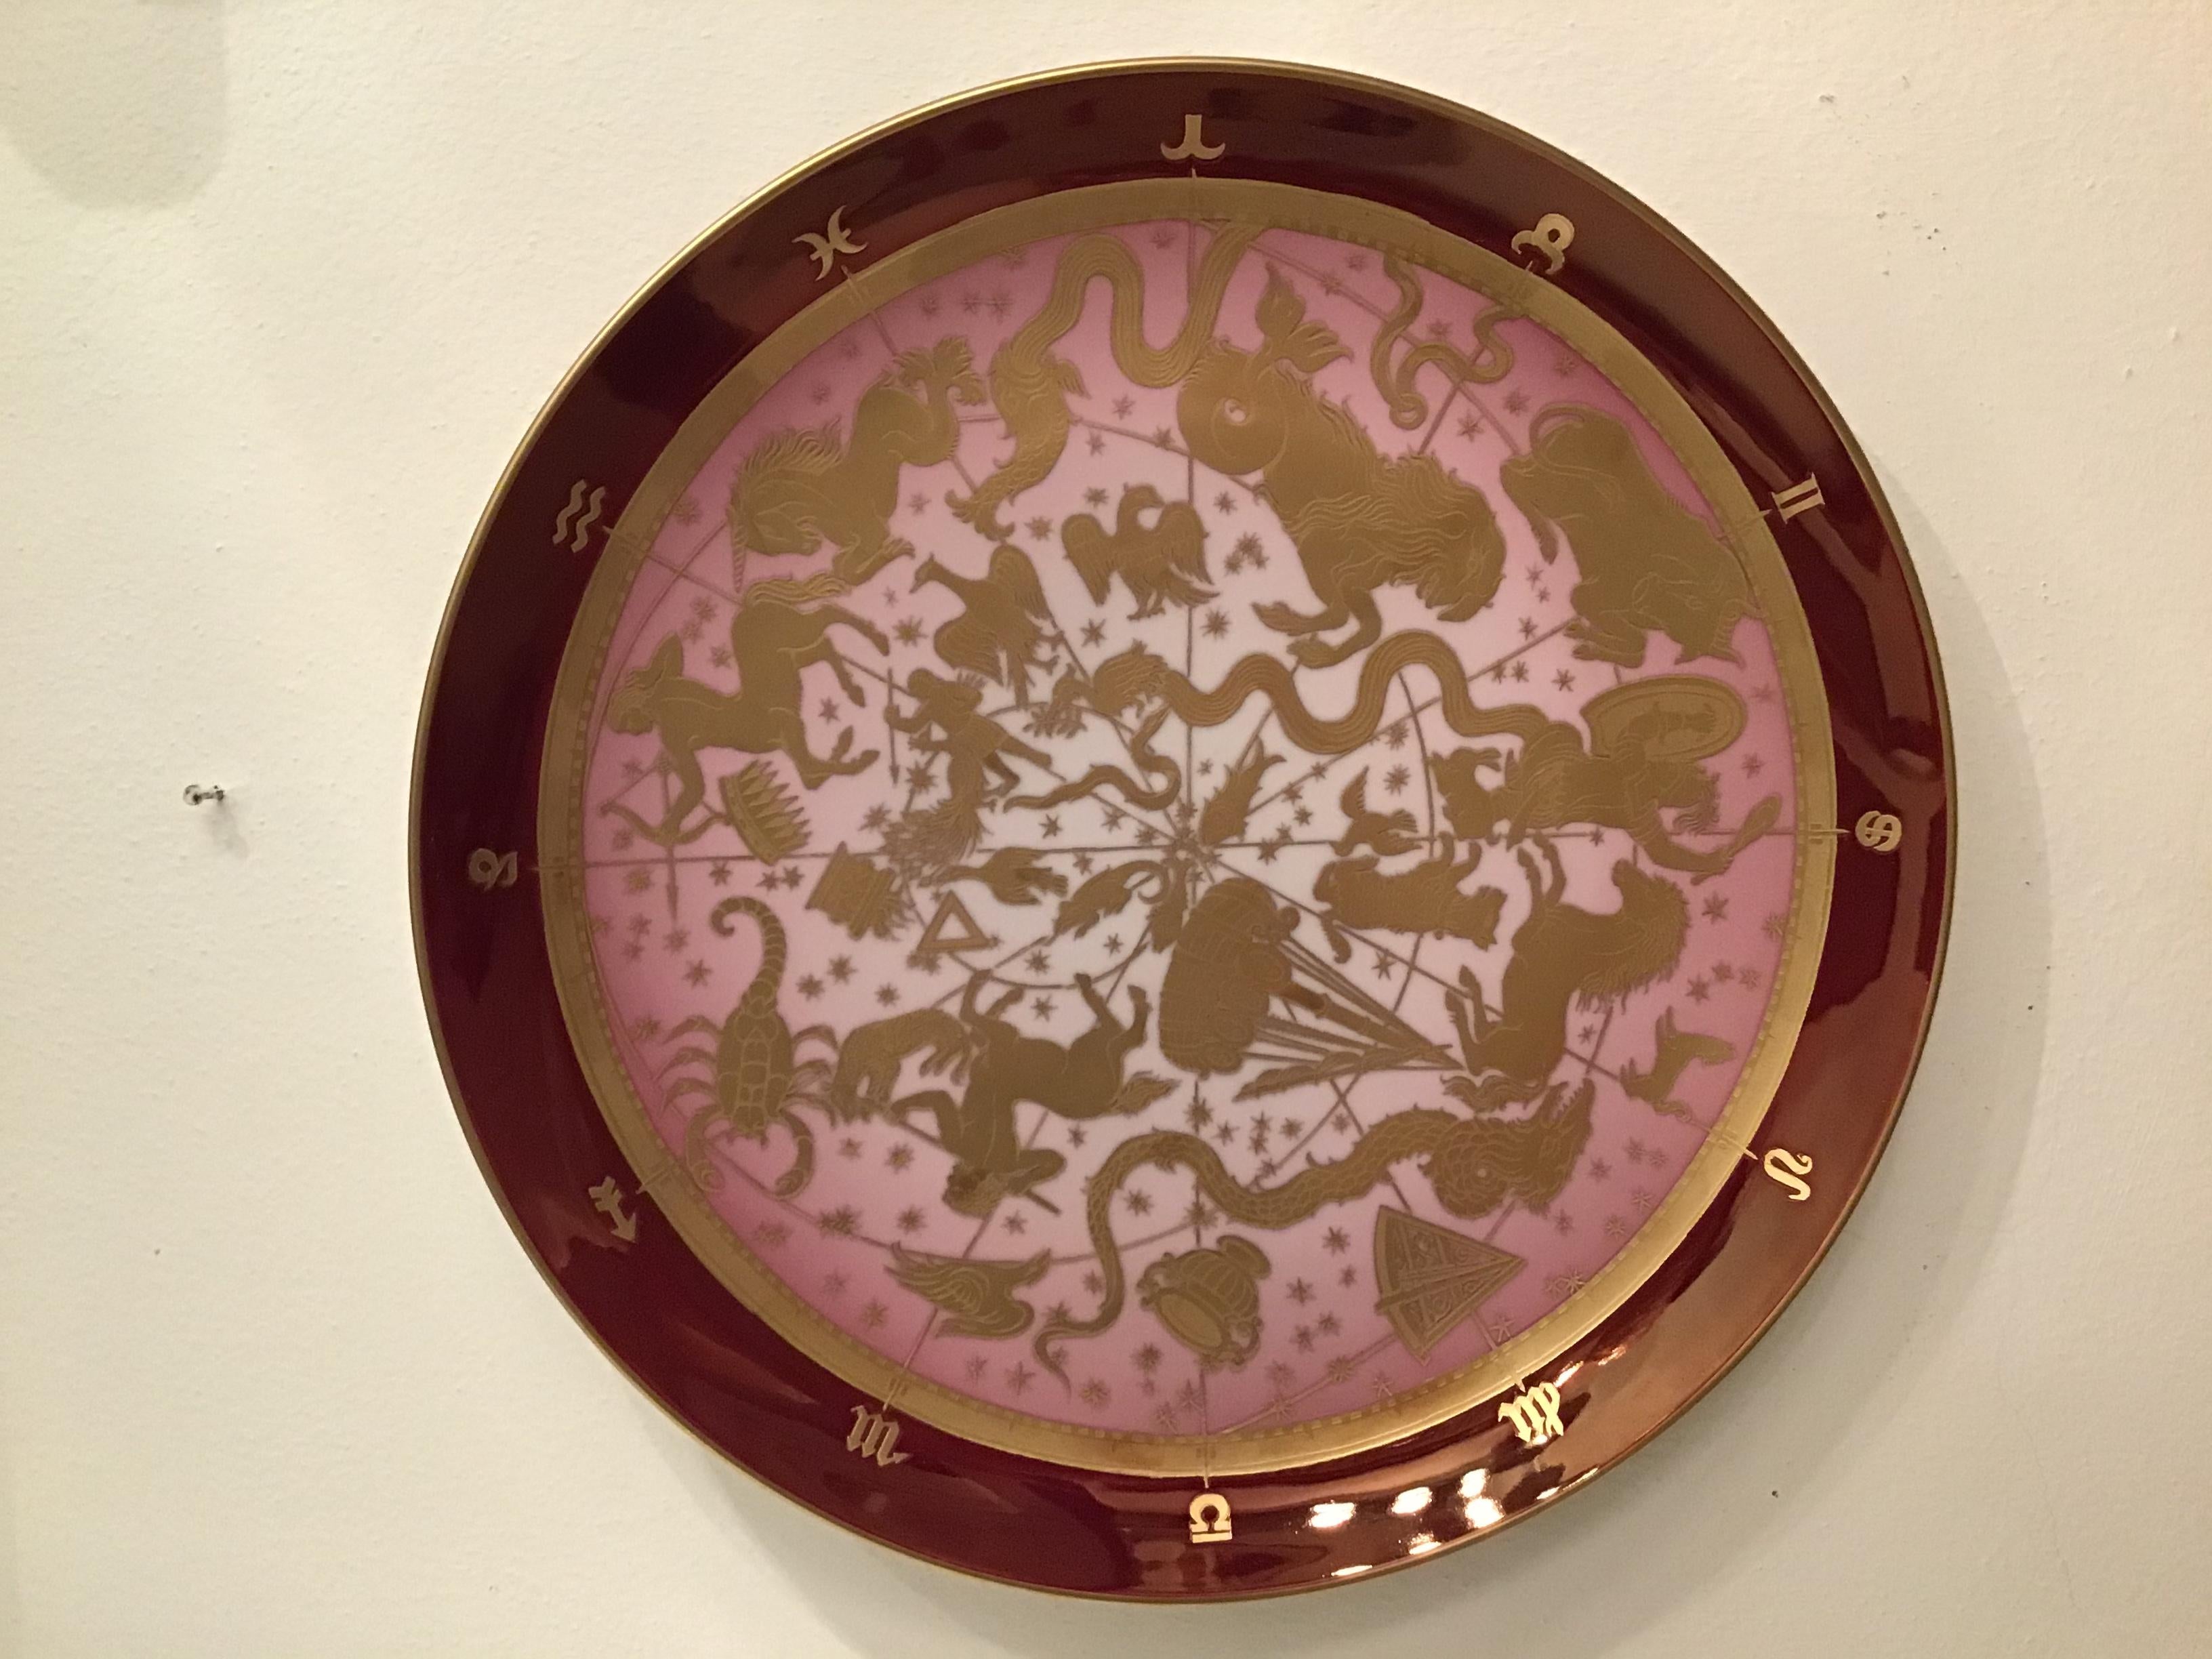 Morbelli Porcelain Wall Plate “Planisfero Celeste“ Worked with Pure Gold 1960 IT For Sale 6